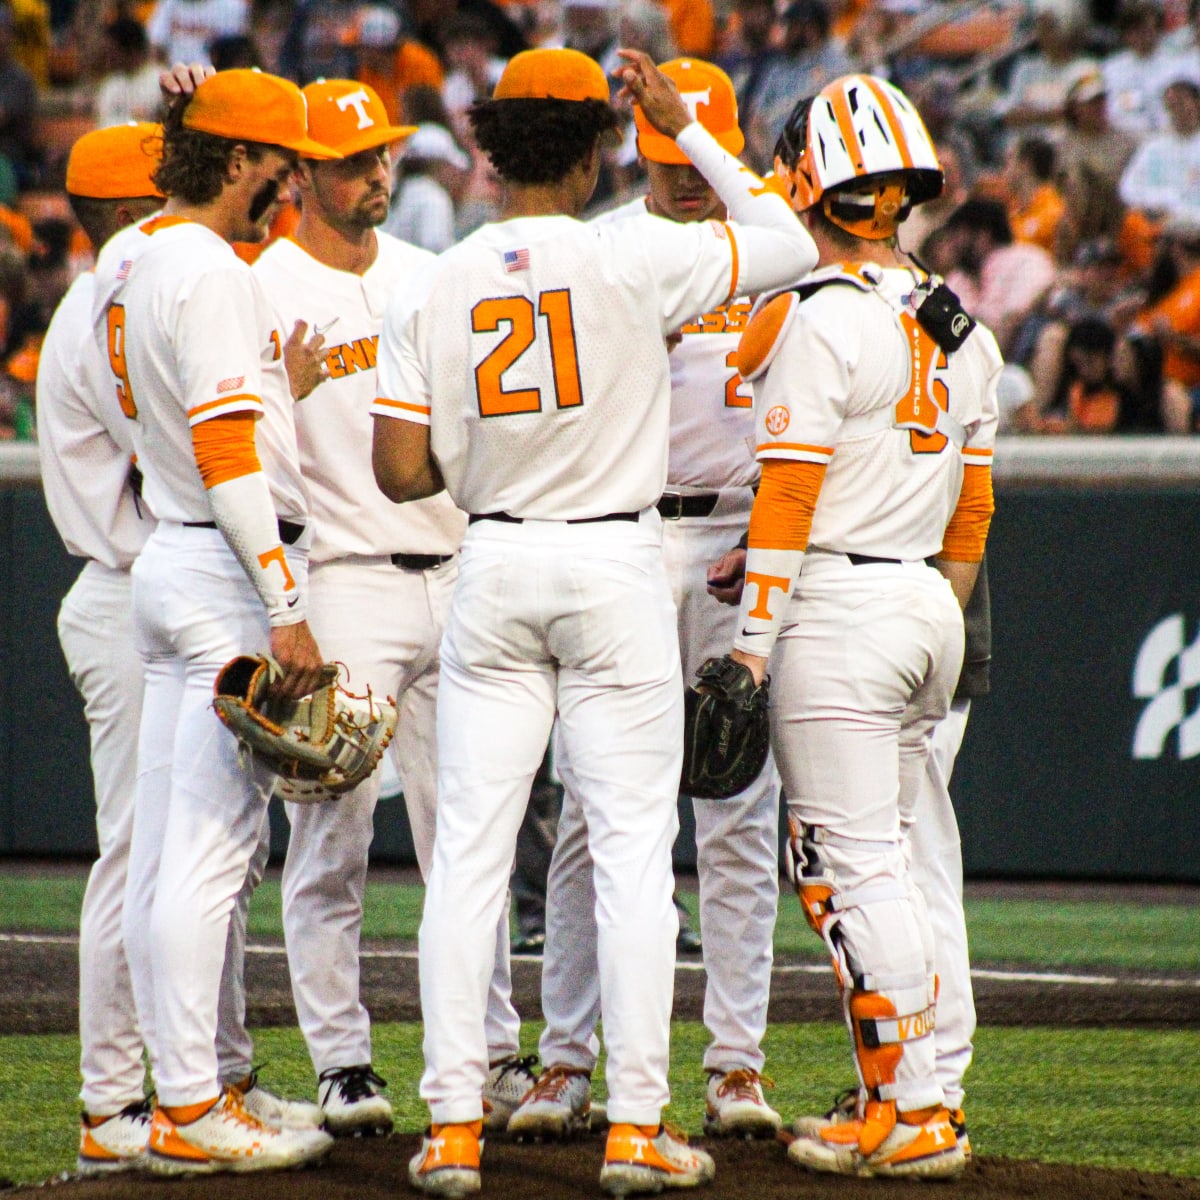 Tennessee baseball game recap: Vols win a thriller against